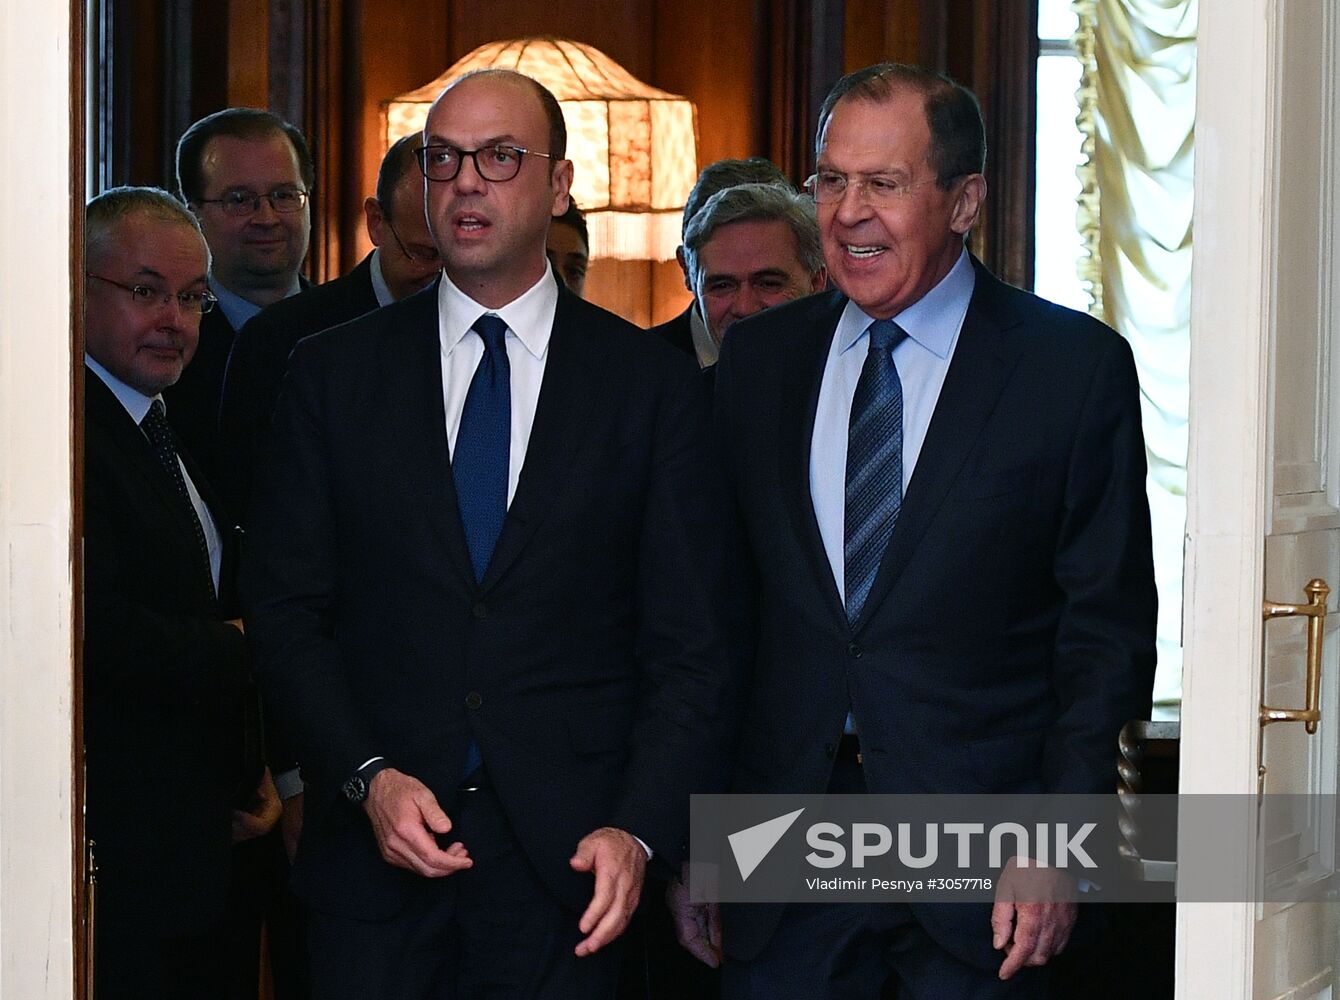 Russian Foreign Minister Sergei Lavrov meets with his Italian counterpart Angelino Alfano